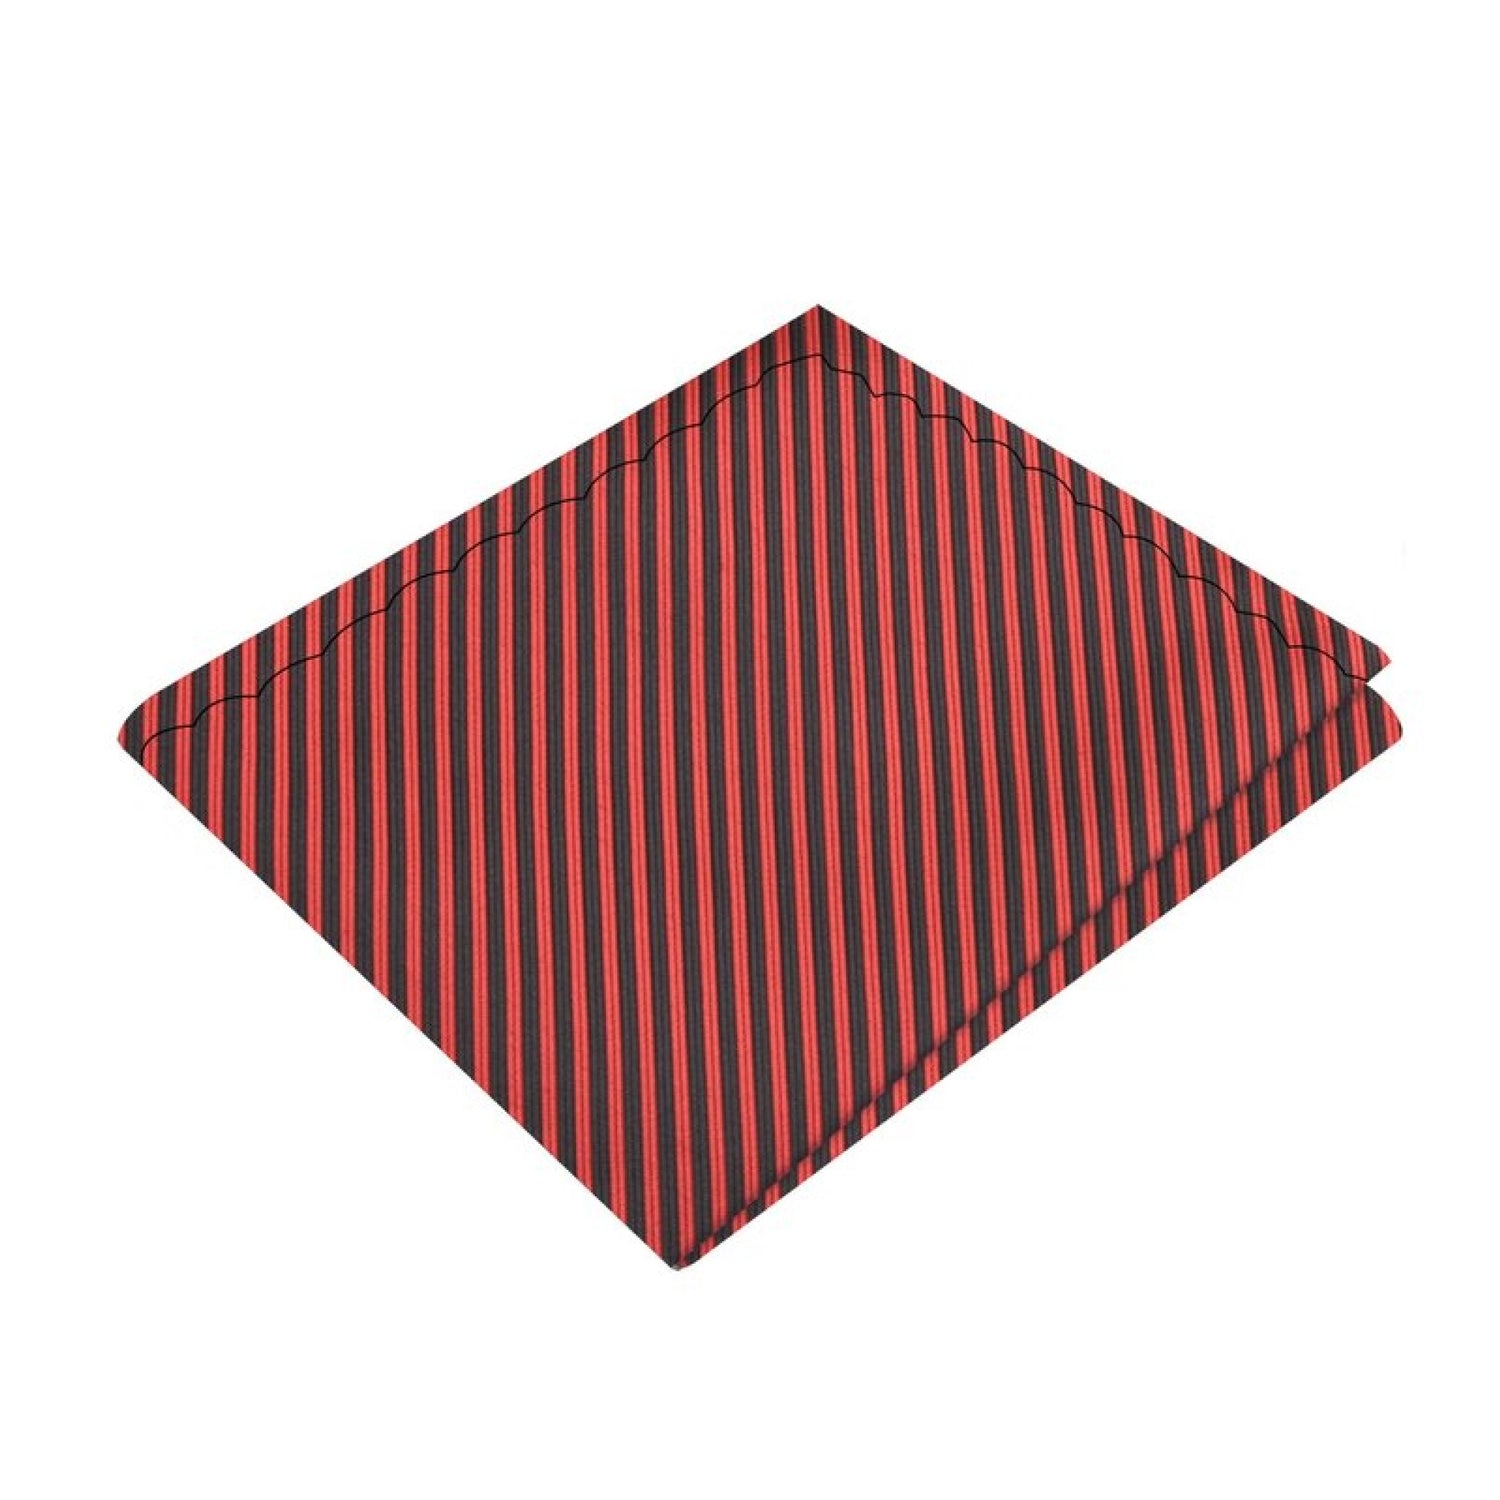 Main View: A Red and Black Stripe Pocket Square